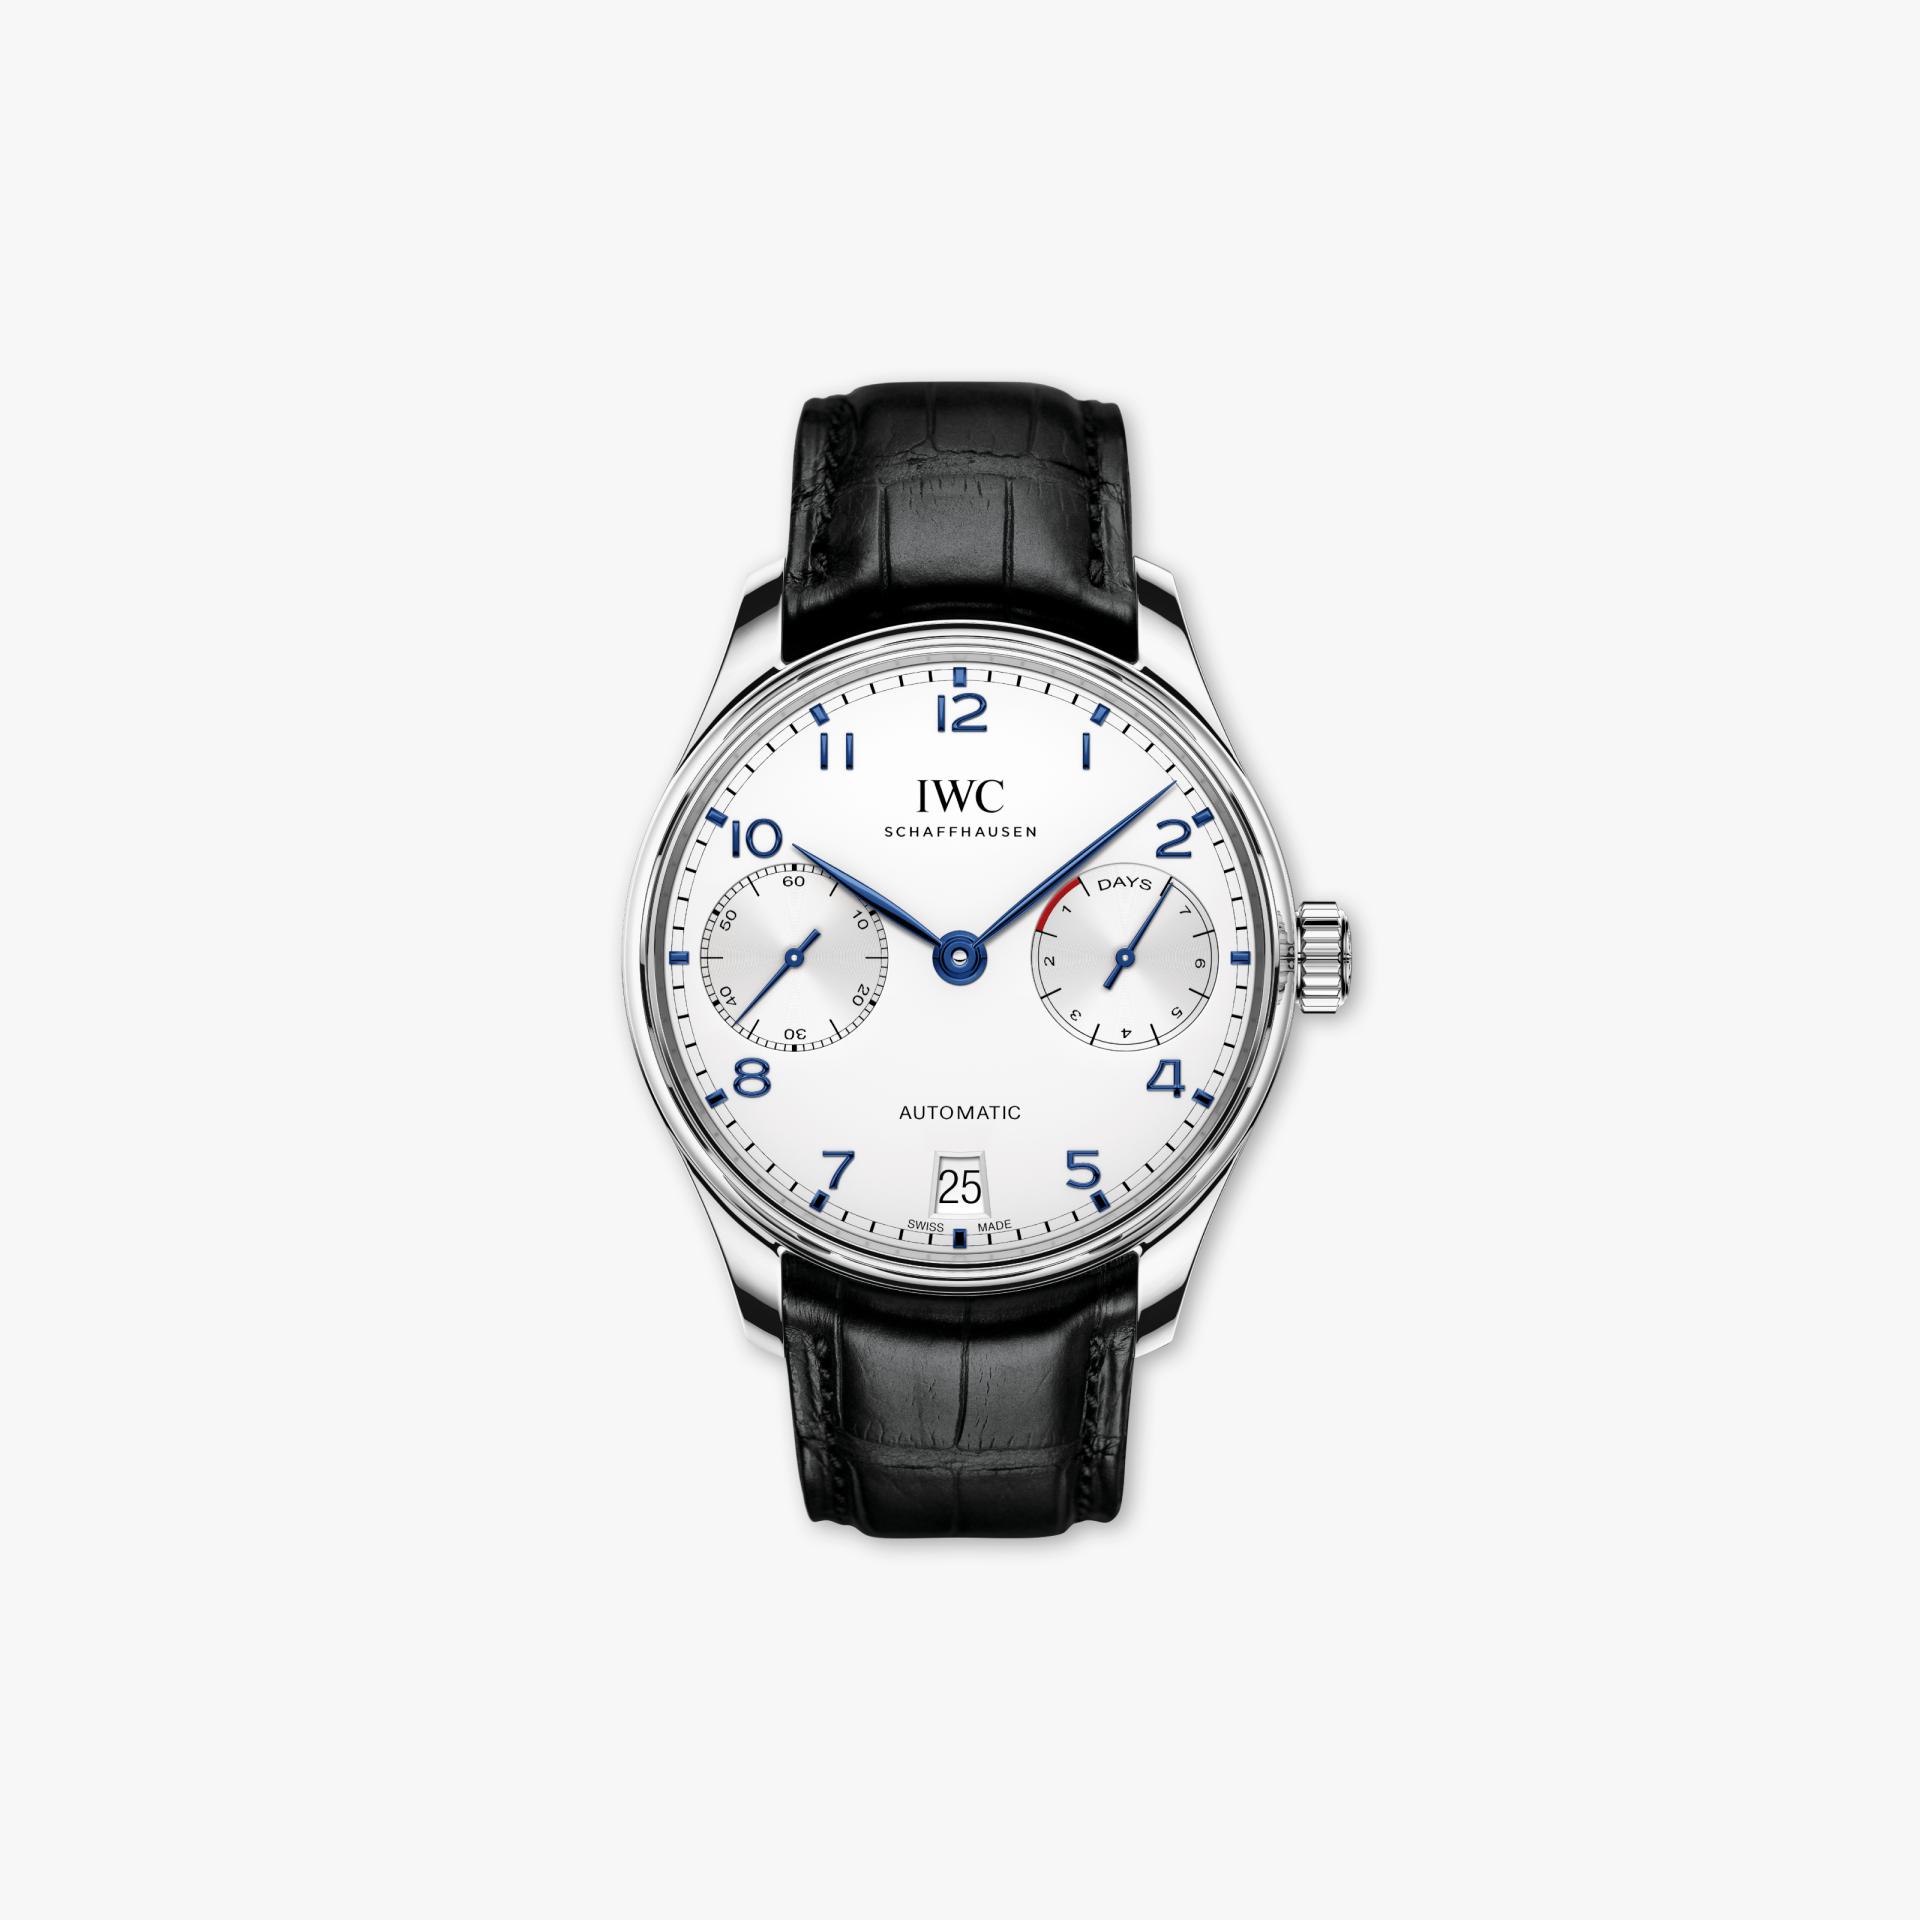 Portugieser Automatic made by IWC